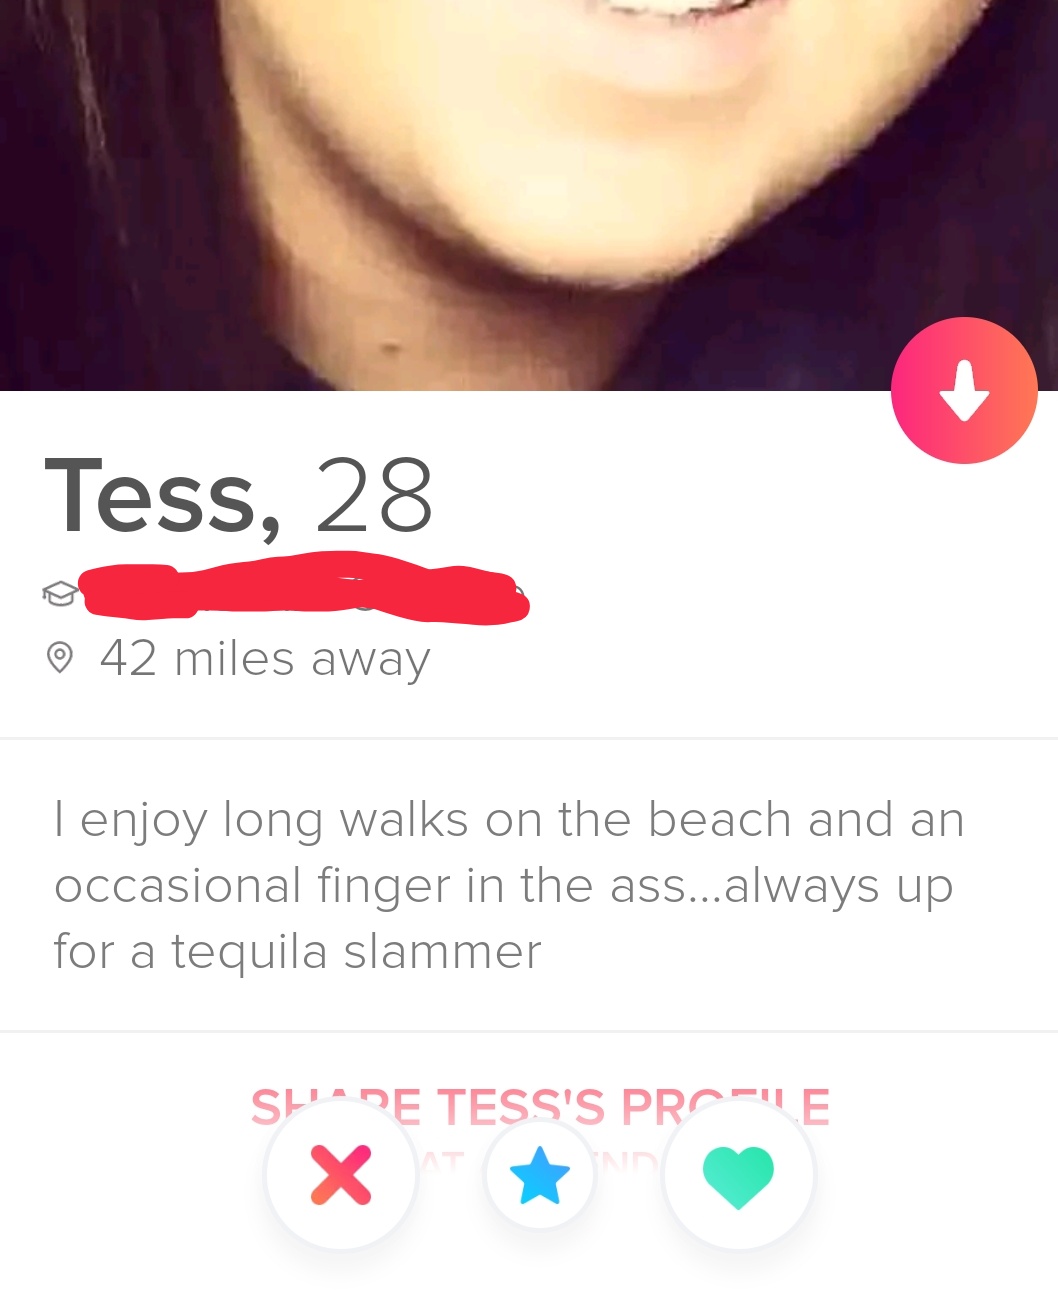 shameless tinder - Tess, 28 42 miles away Tenjoy long walks on the beach and an occasional finger in the ass...always up for a tequila slammer Shade Tess'S Prc